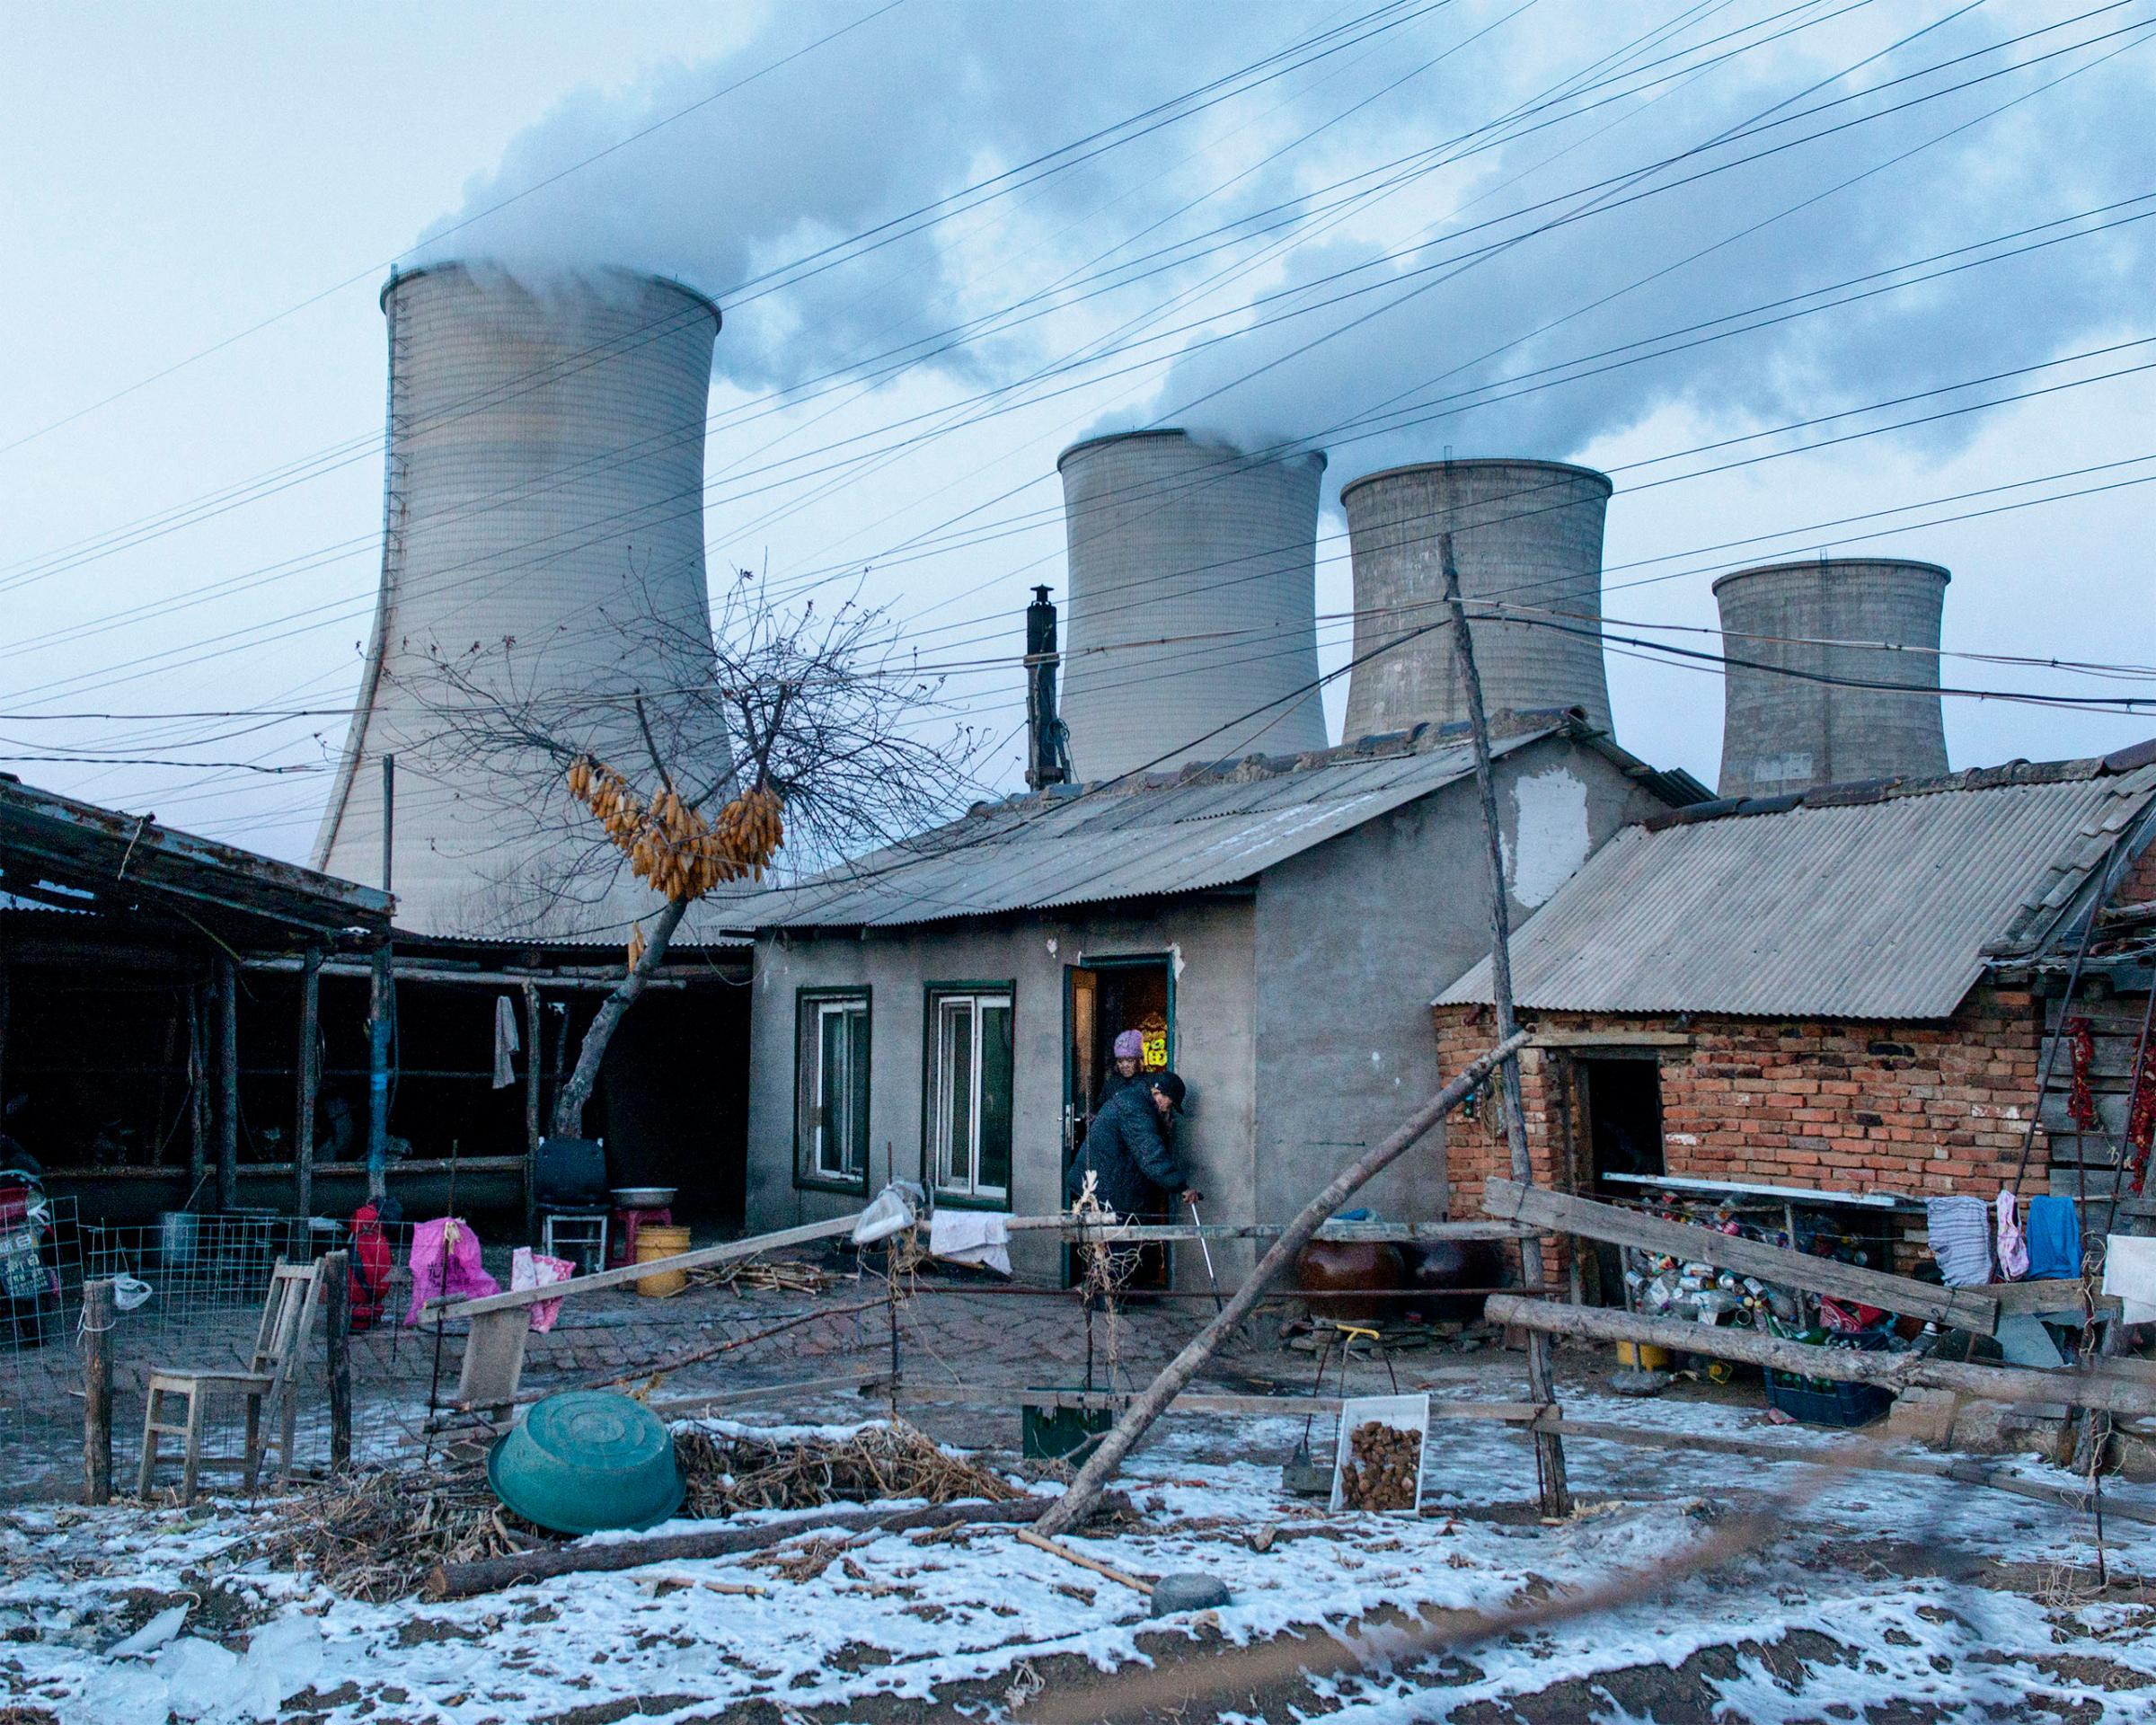 A farm situated next to a thermal power plant close to the North Korean border in Tumen, China.